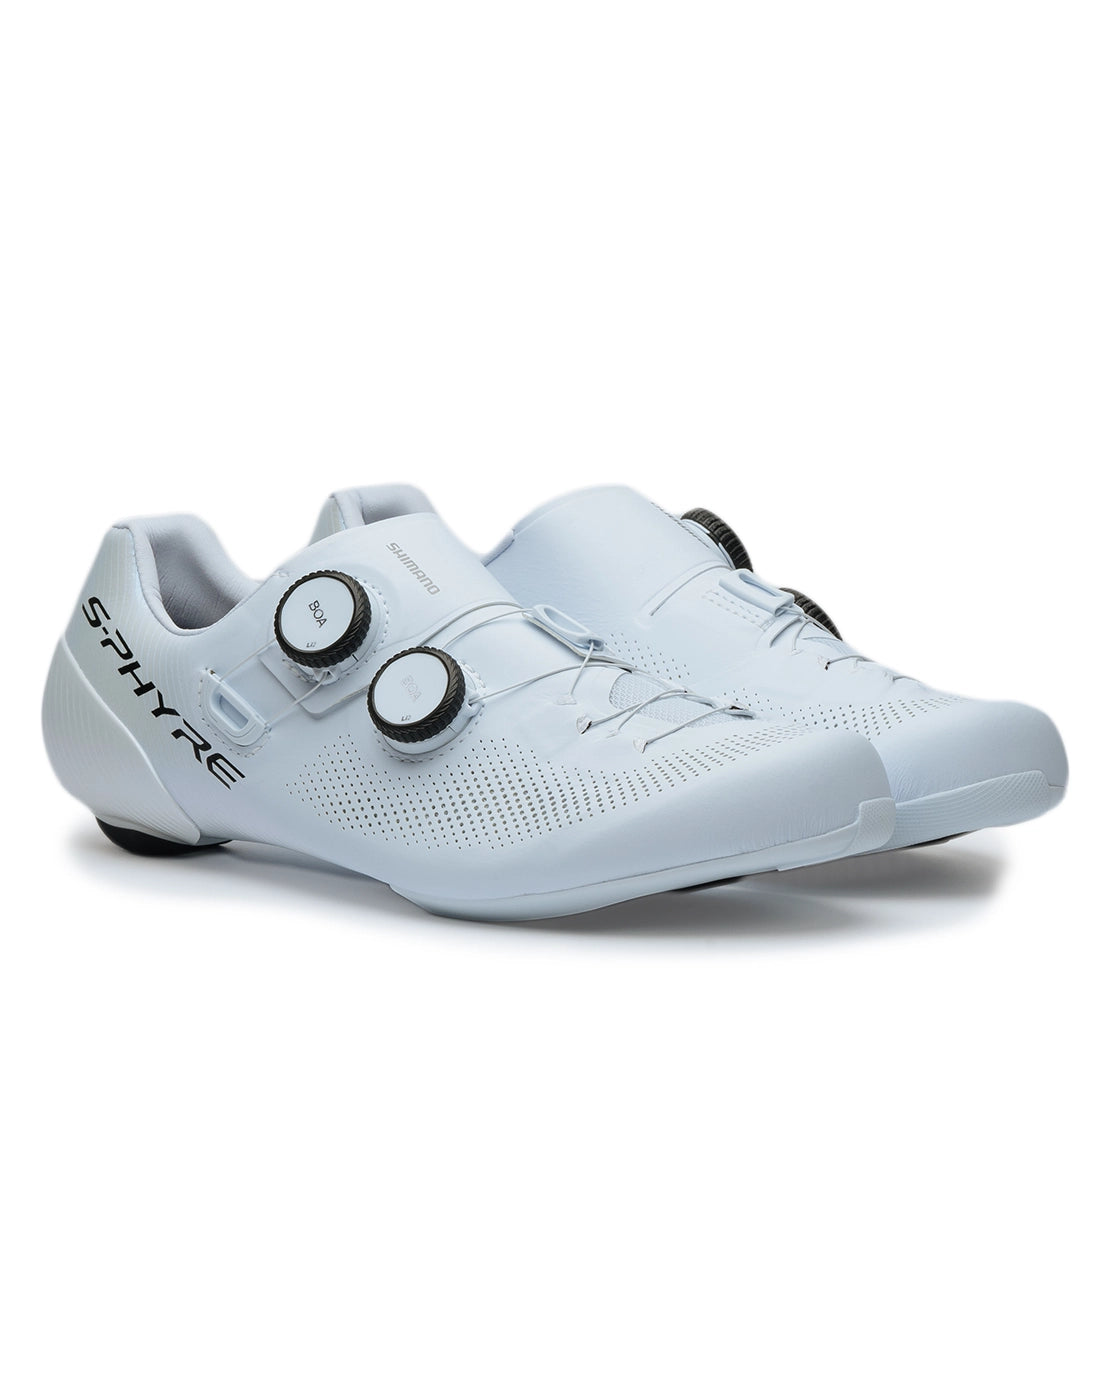 Shimano S-Phyre - RC903 White